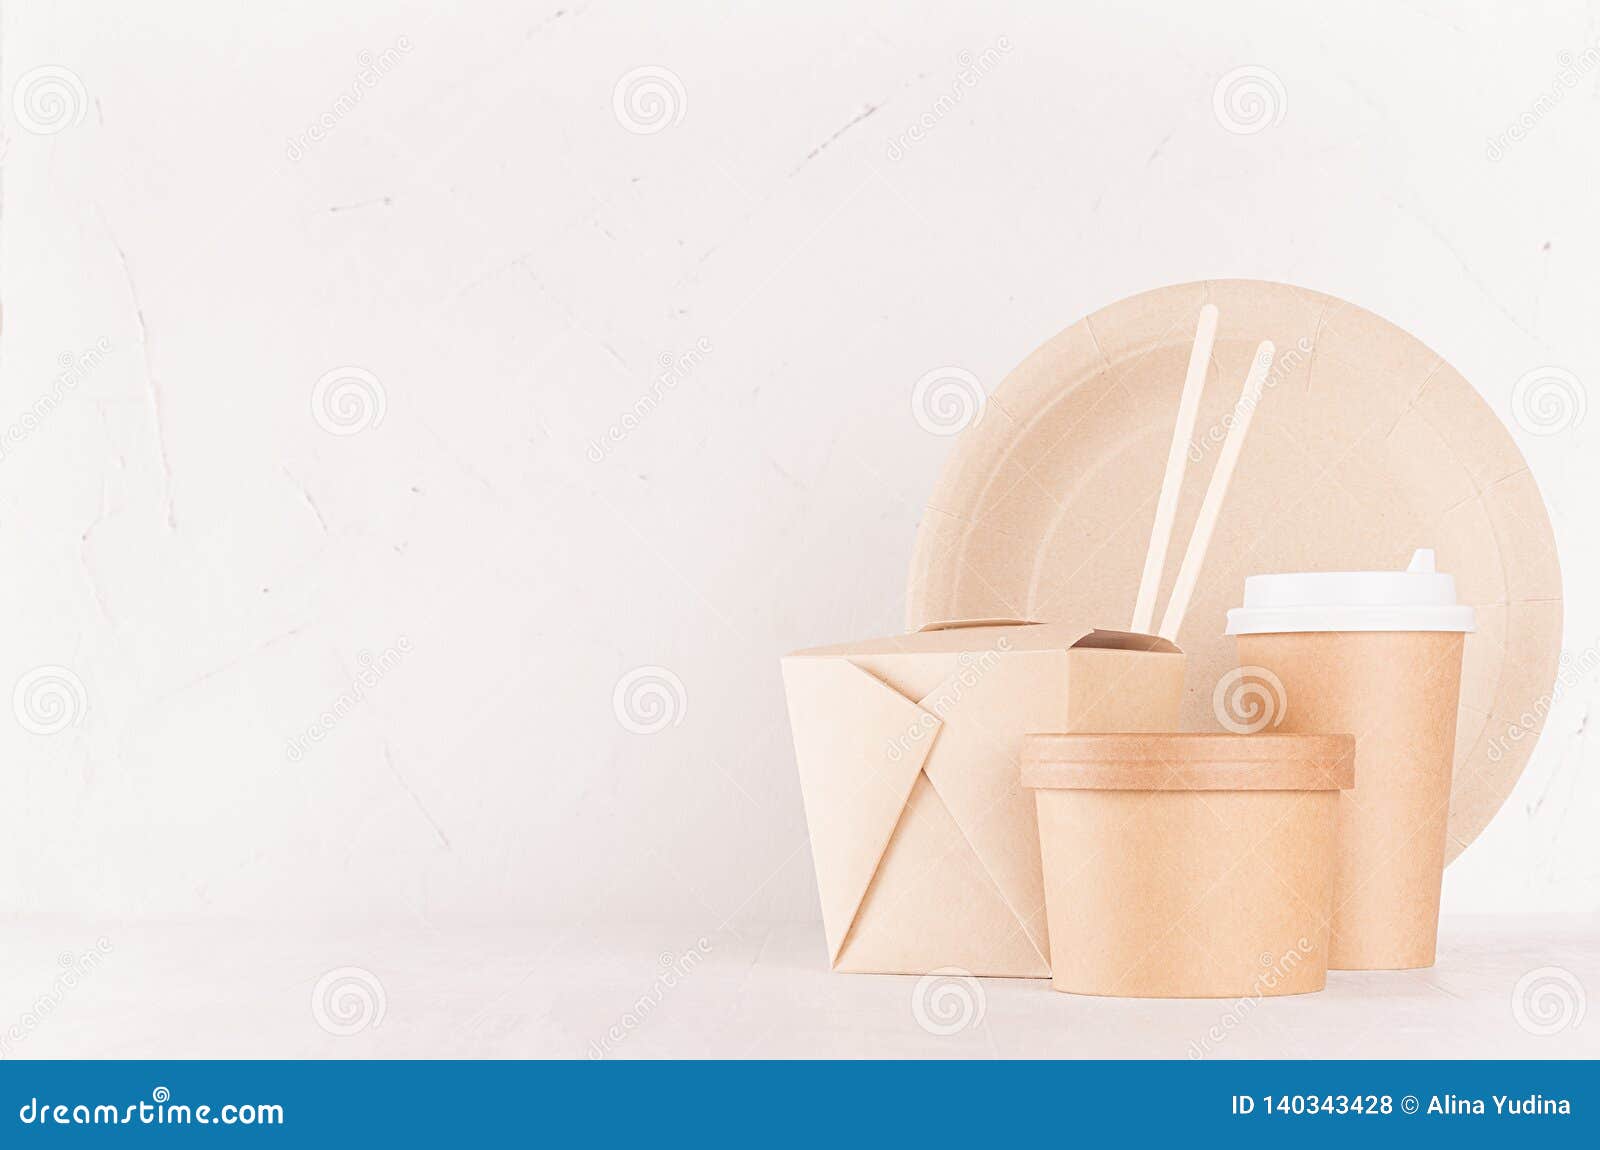 Download Mockup Food Takeaway Packaging For Cafe And Restaurant Blank Container Box For Food Drink Packet Chopsticks Of Brown Paper Stock Photo Image Of Board White 140343428